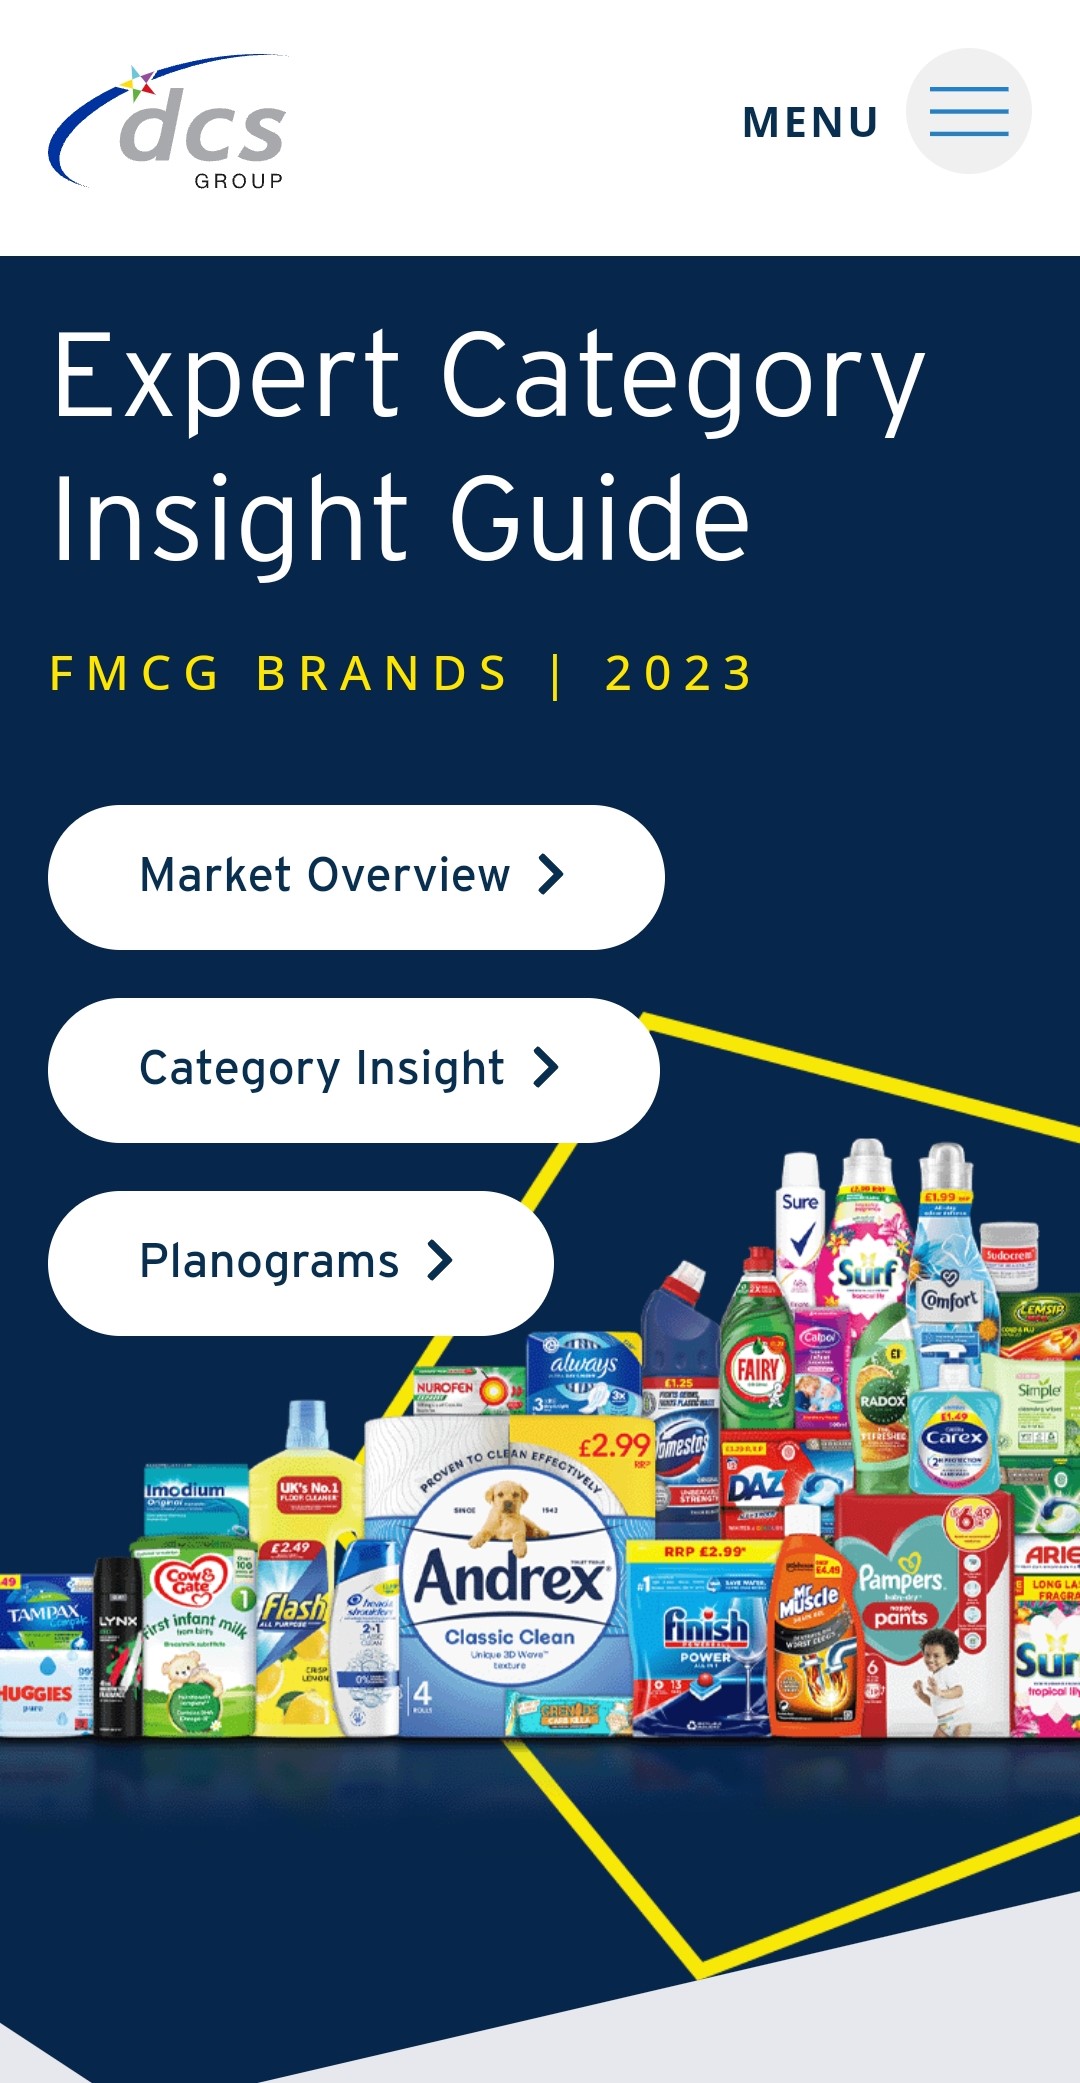 Leading distributor launches insight website for retailers